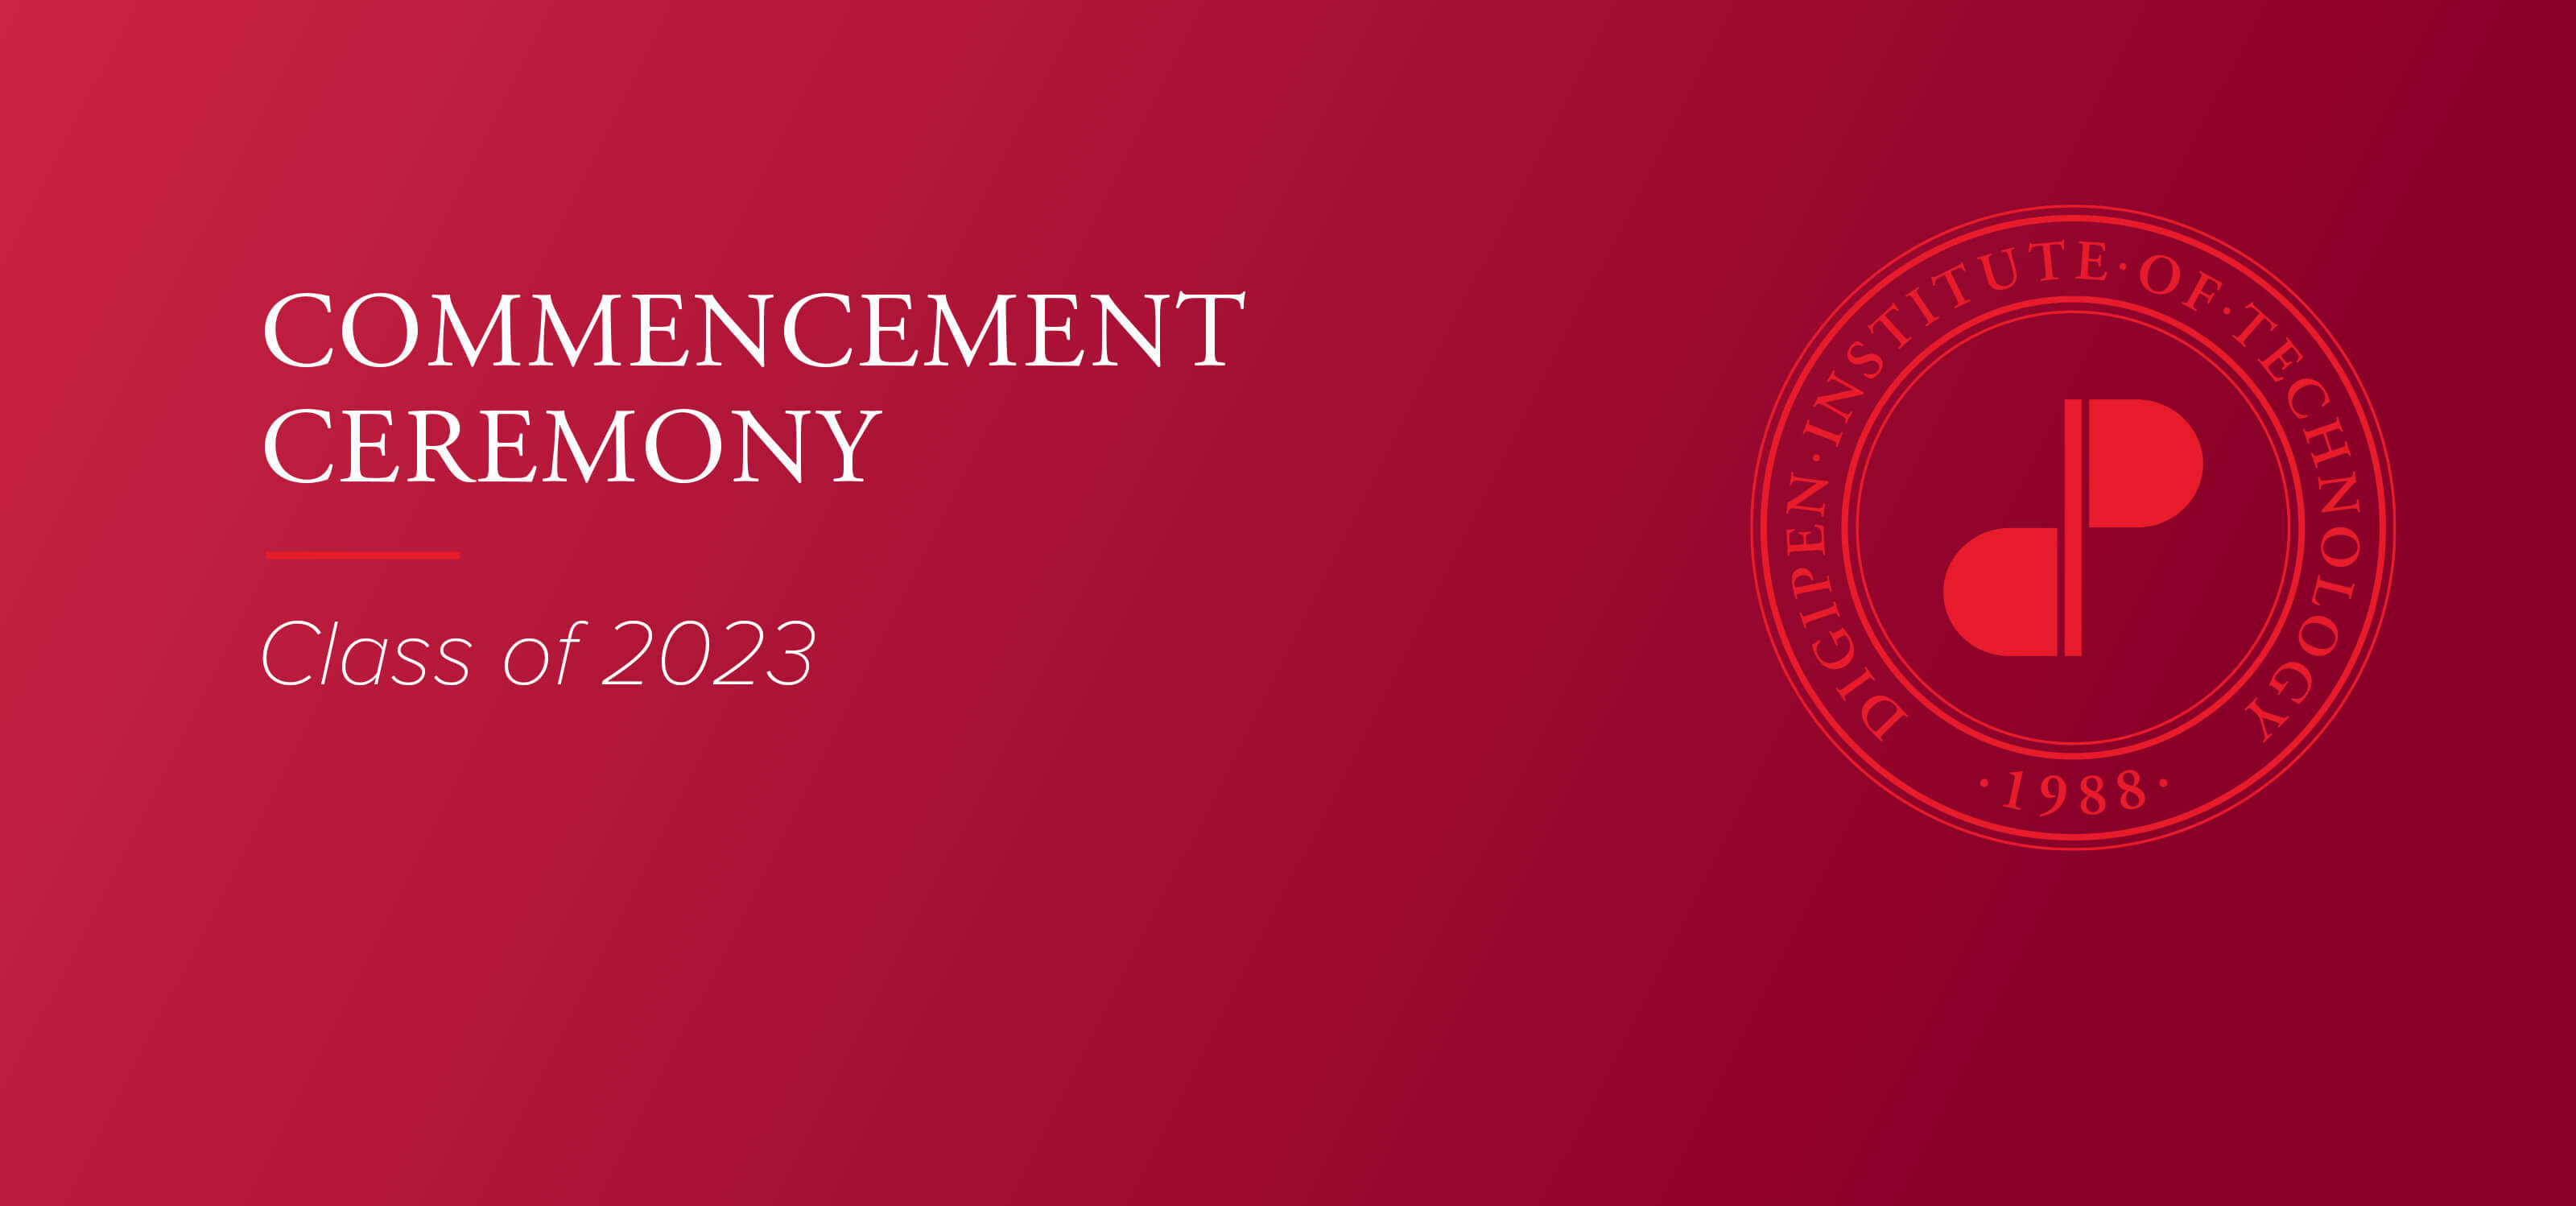 2023 Commencement banner with DigiPen logo